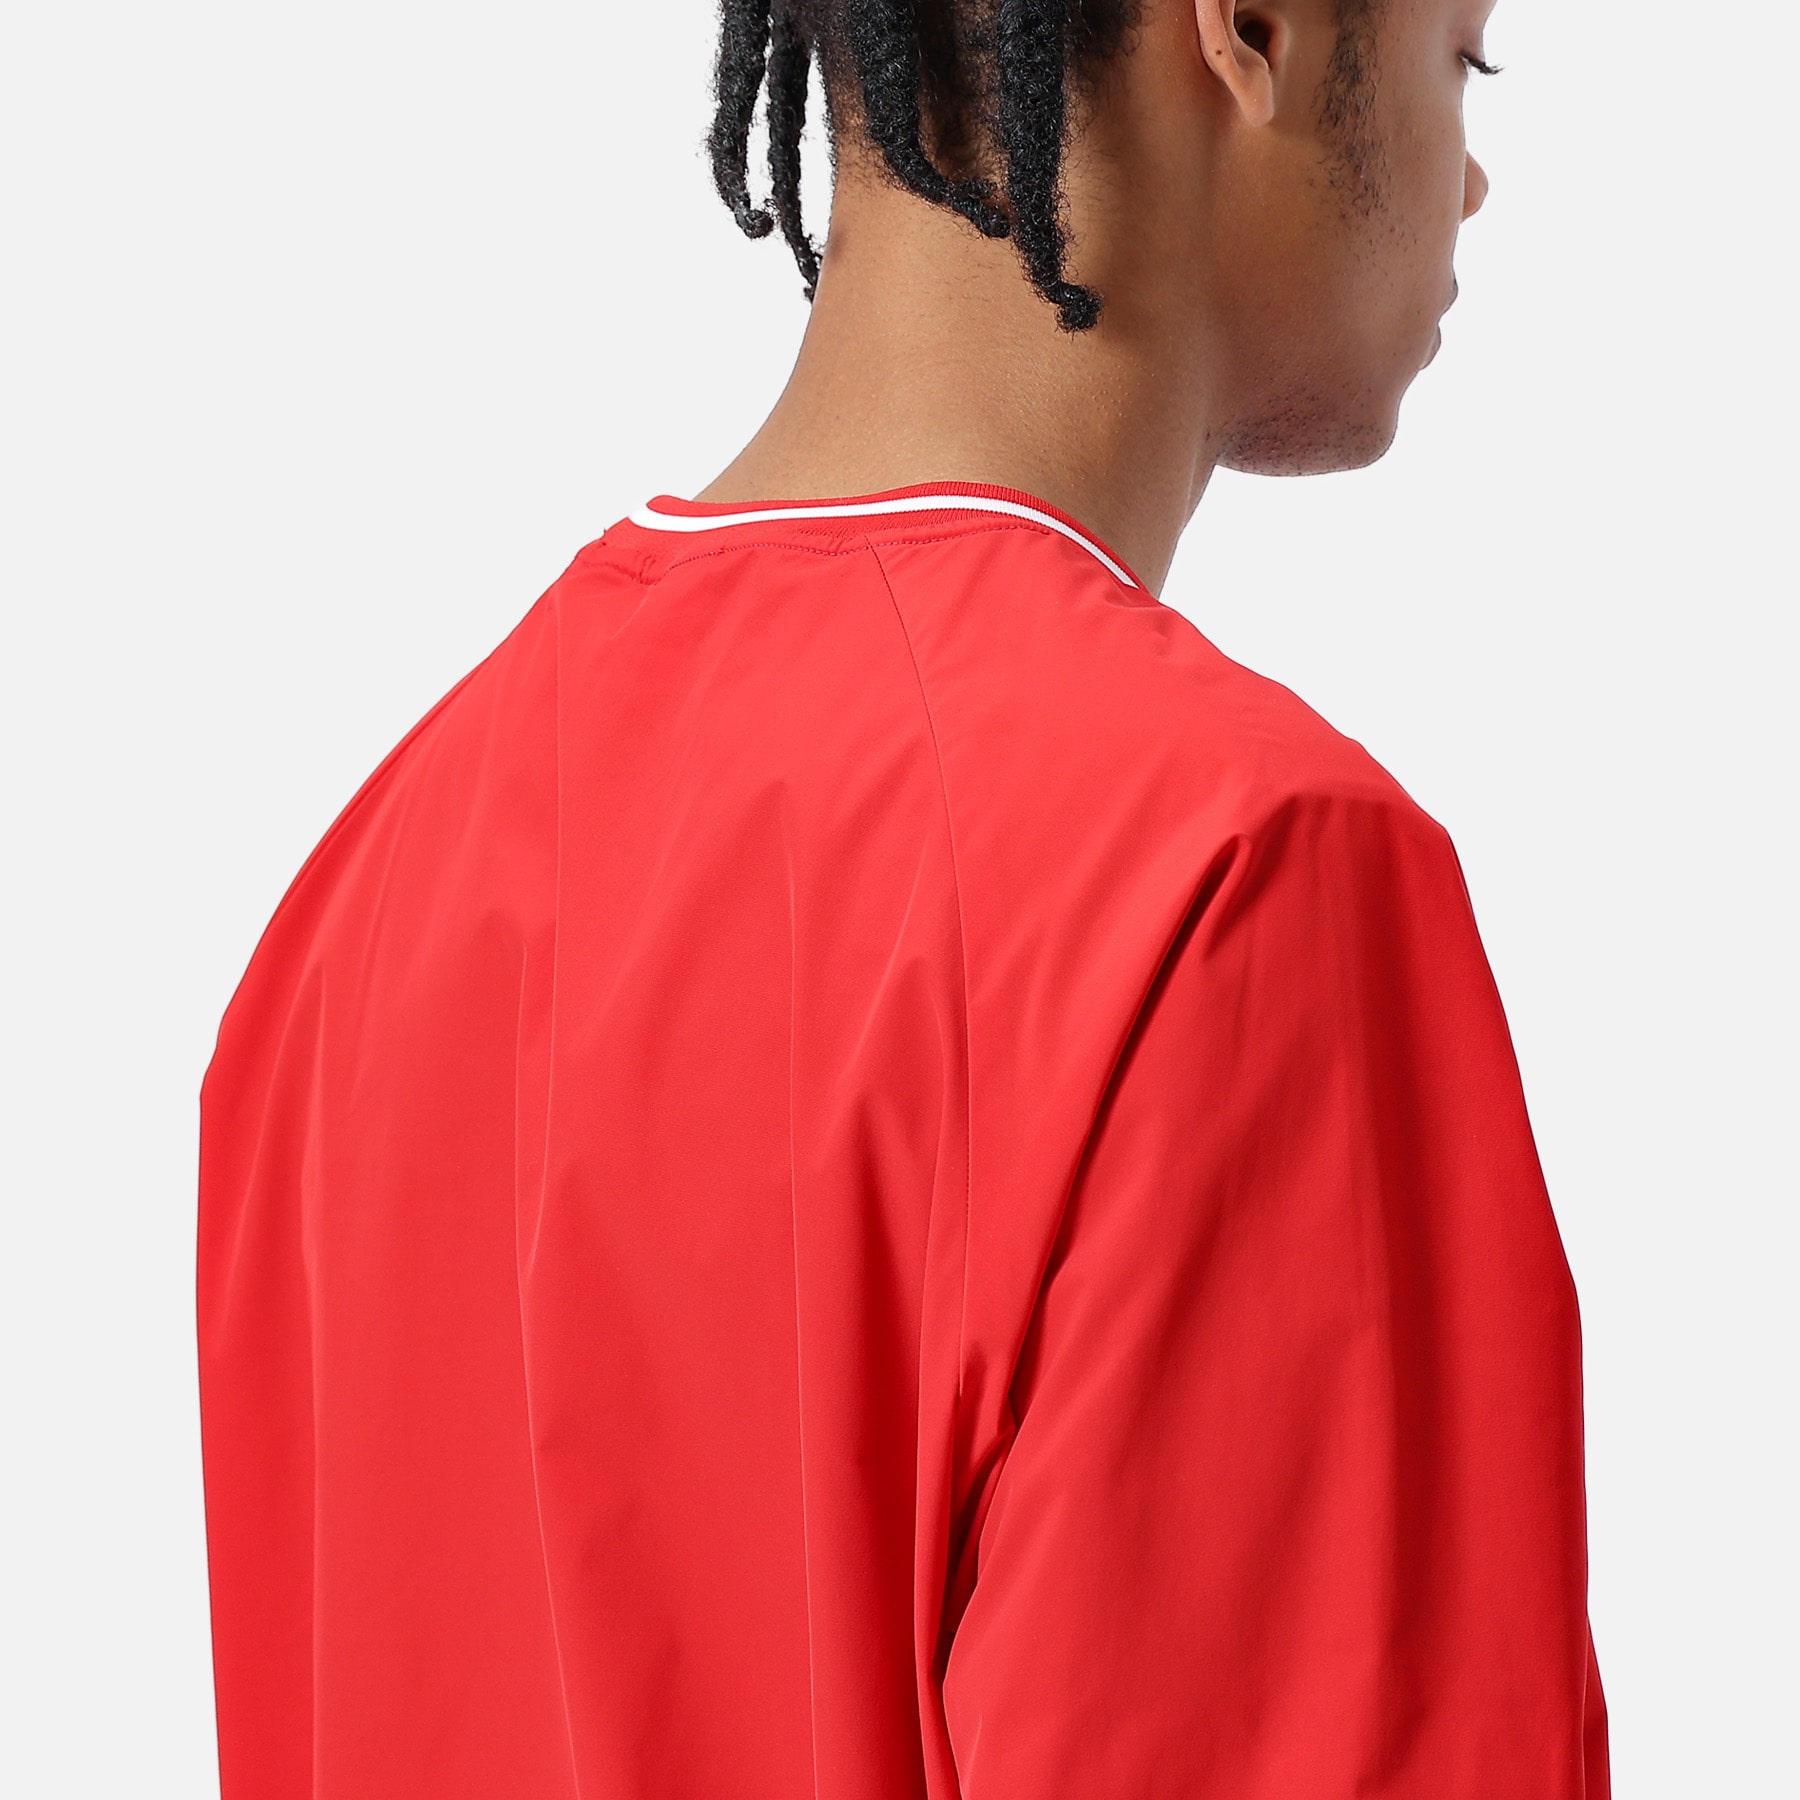 SOPH. | AUTHENTIC LOGO RIBBED TRAINING PISTE(M RED):